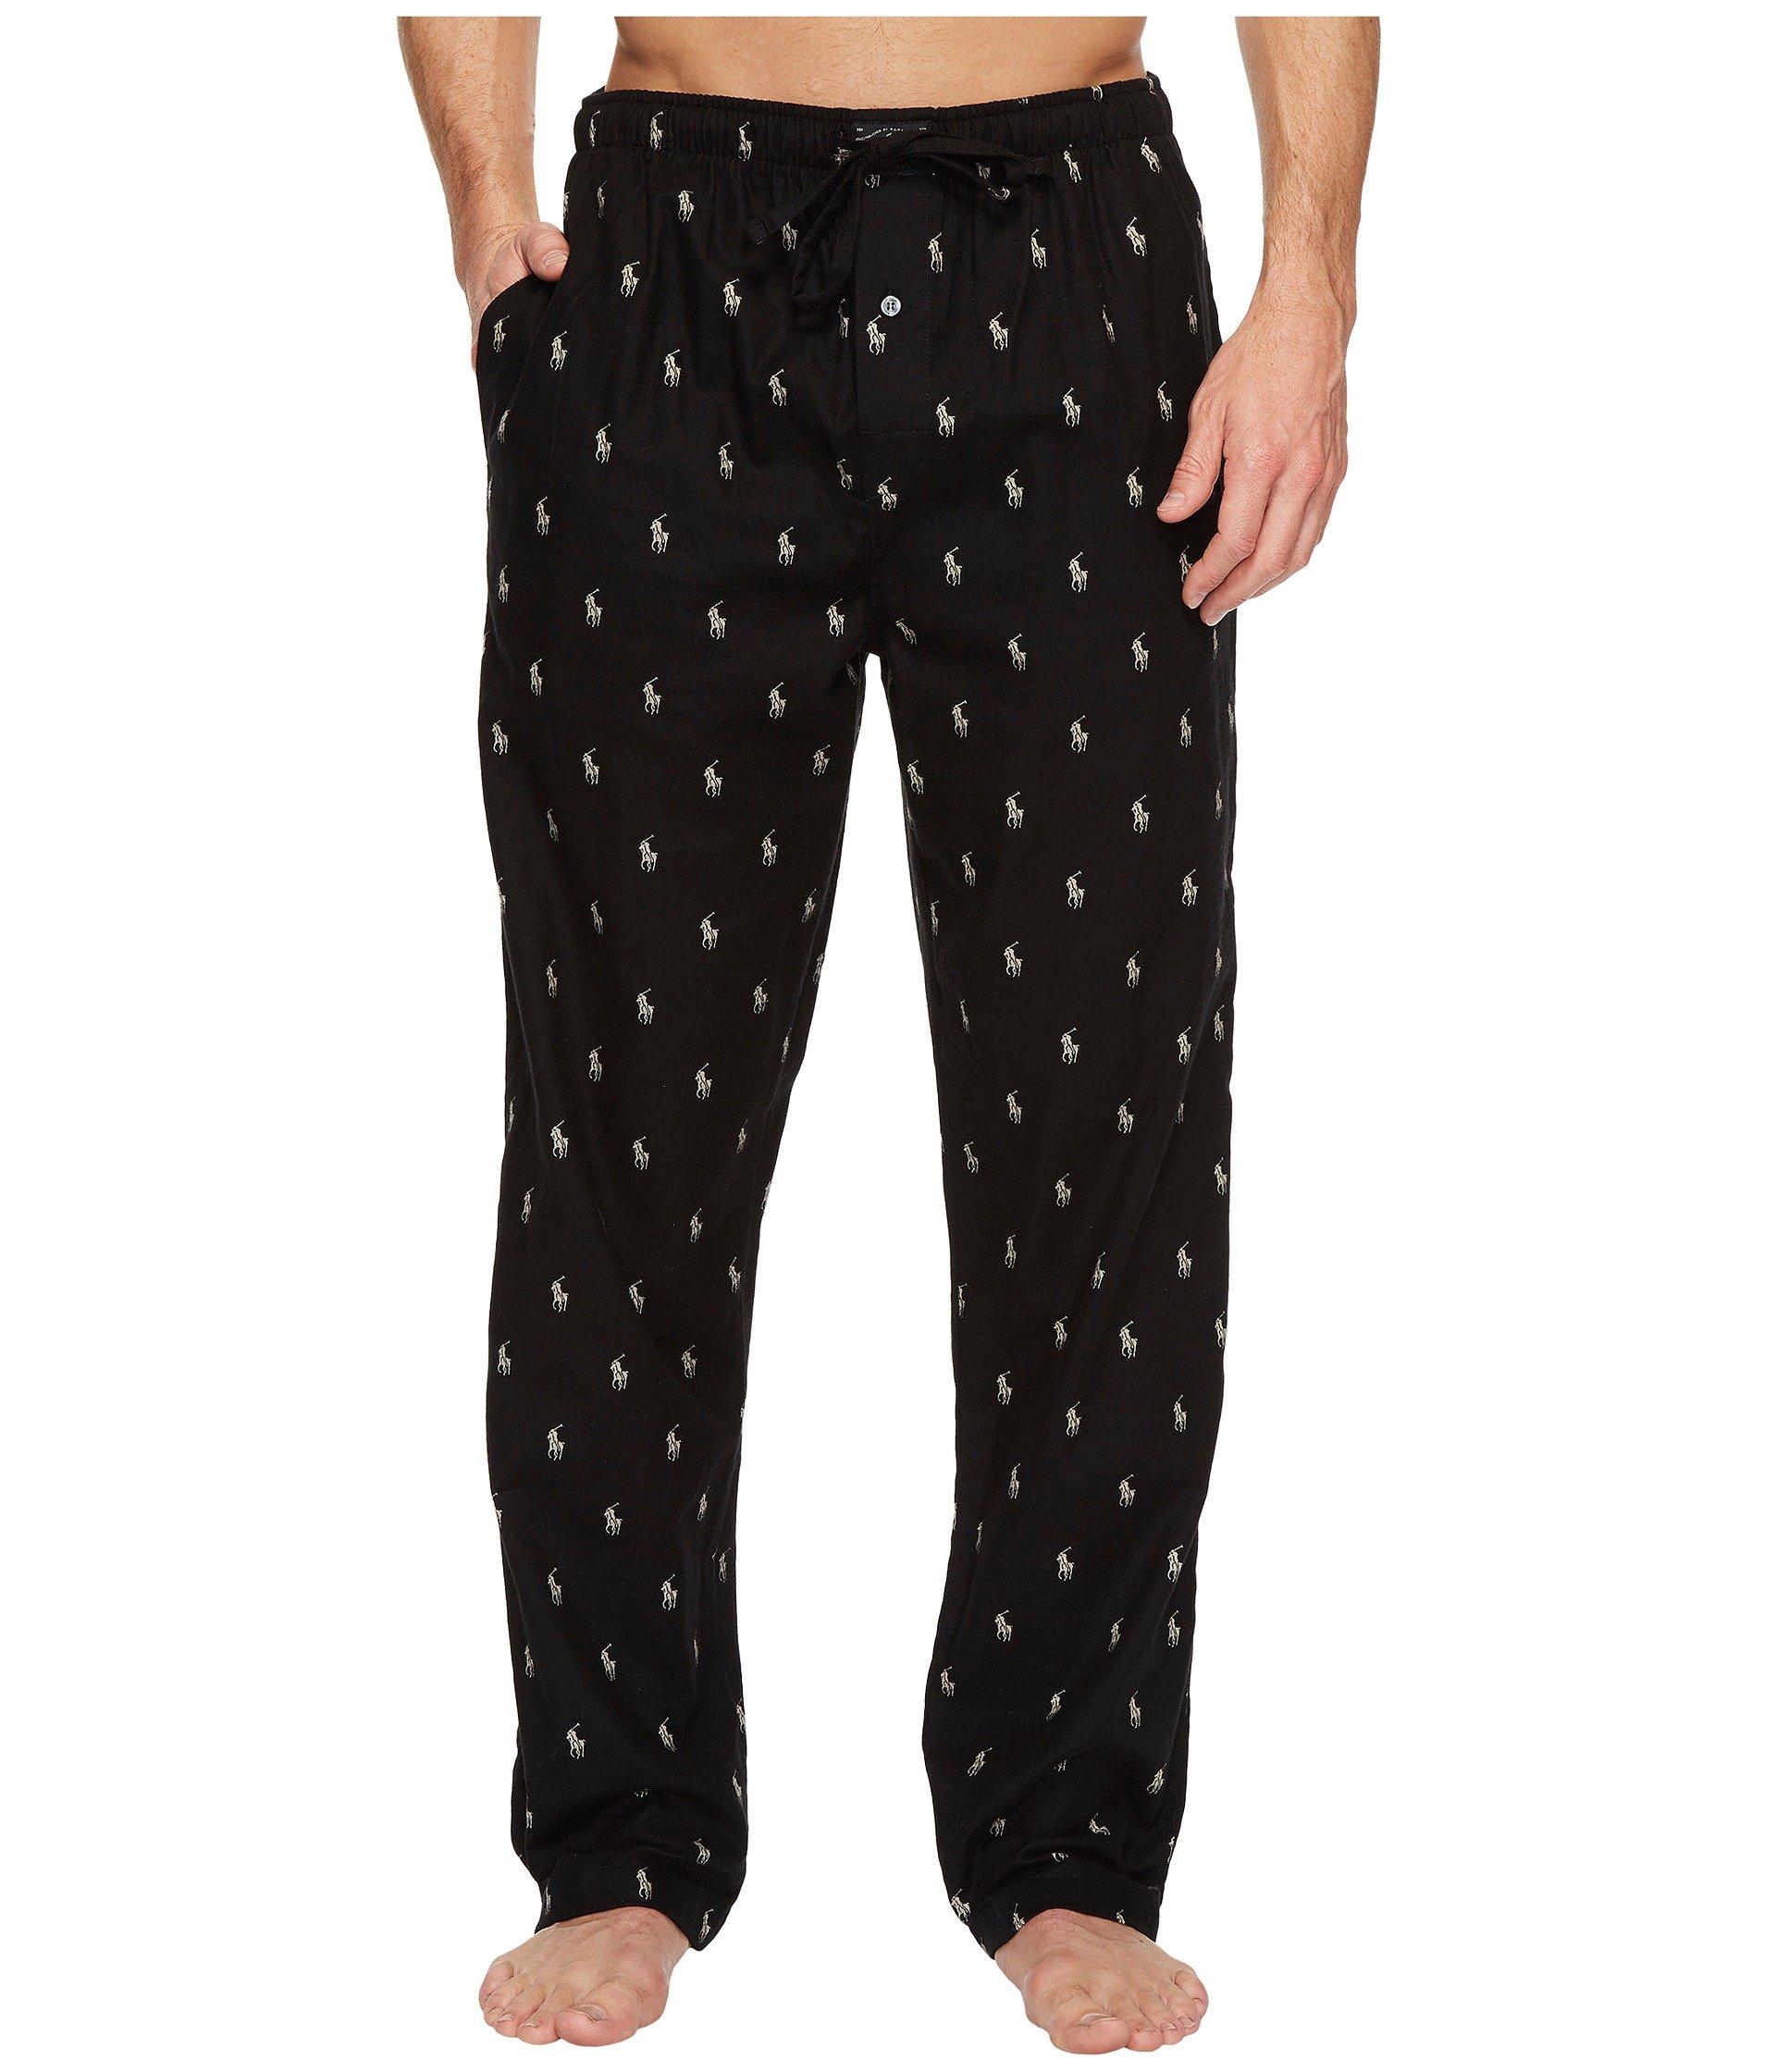 Polo Ralph Lauren Printed Pony Cotton Pajama Pants in Black for Men - Save 46% - Lyst